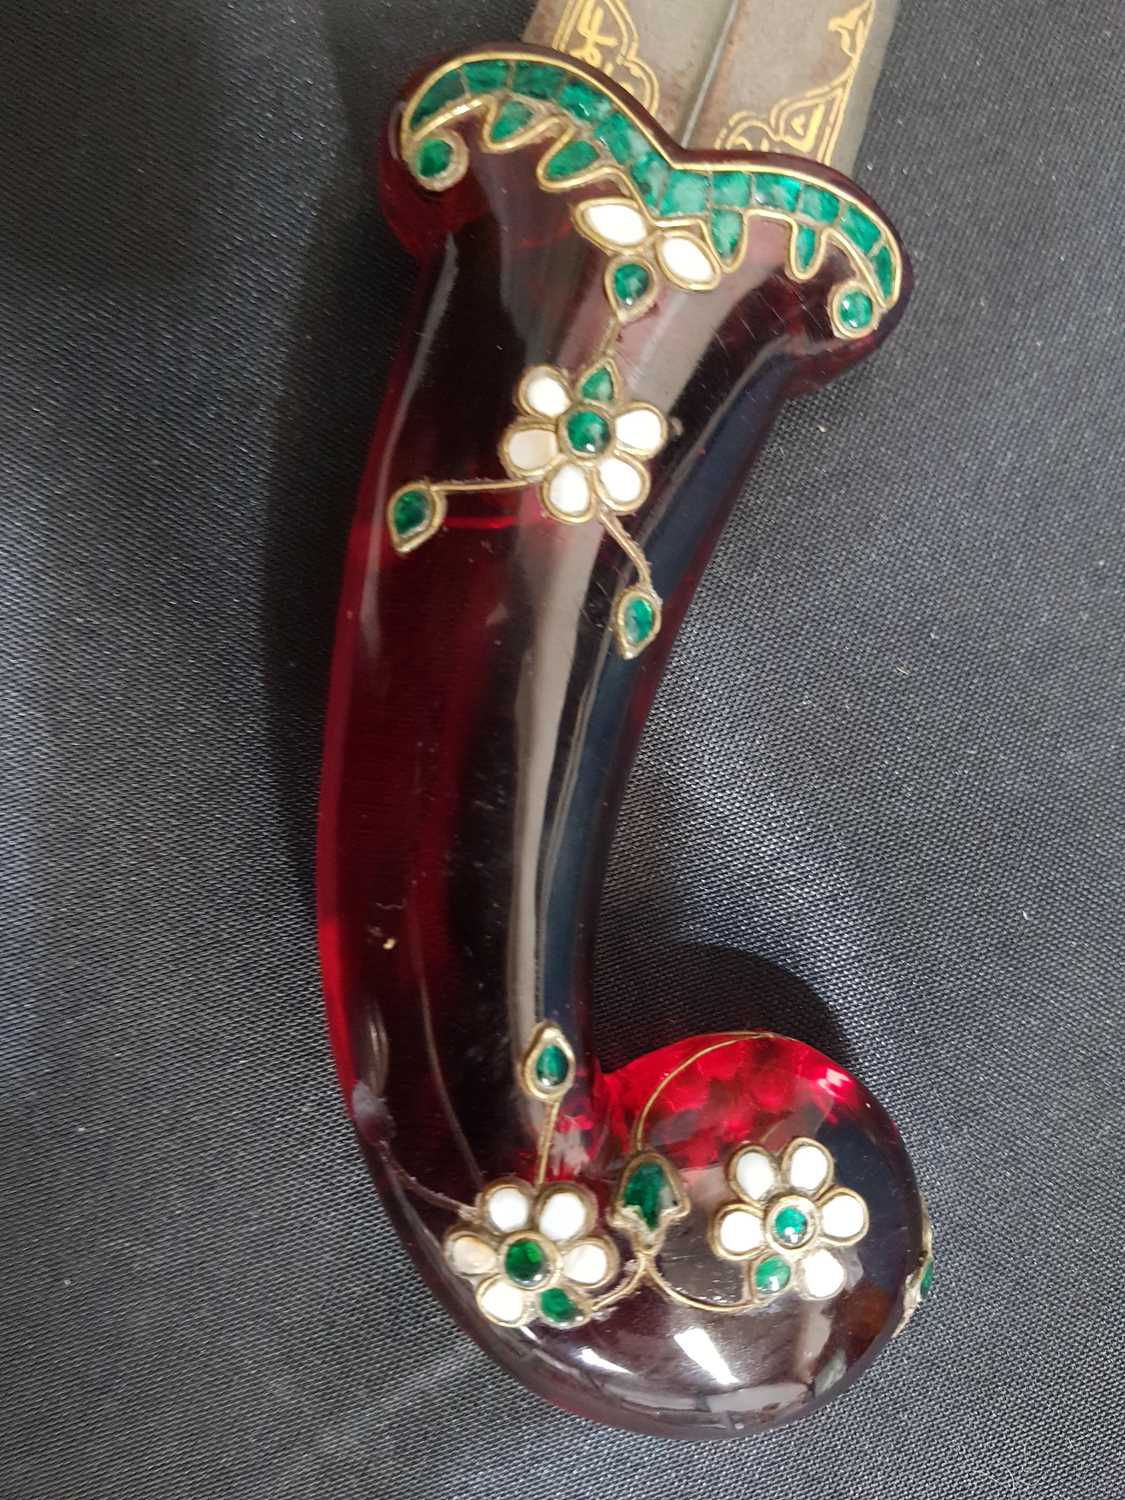 AN INLAID RED CRYSTAL-HILTED DAGGER, MUGHAL, INDIA, 18TH-19TH CENTURY - Image 6 of 15